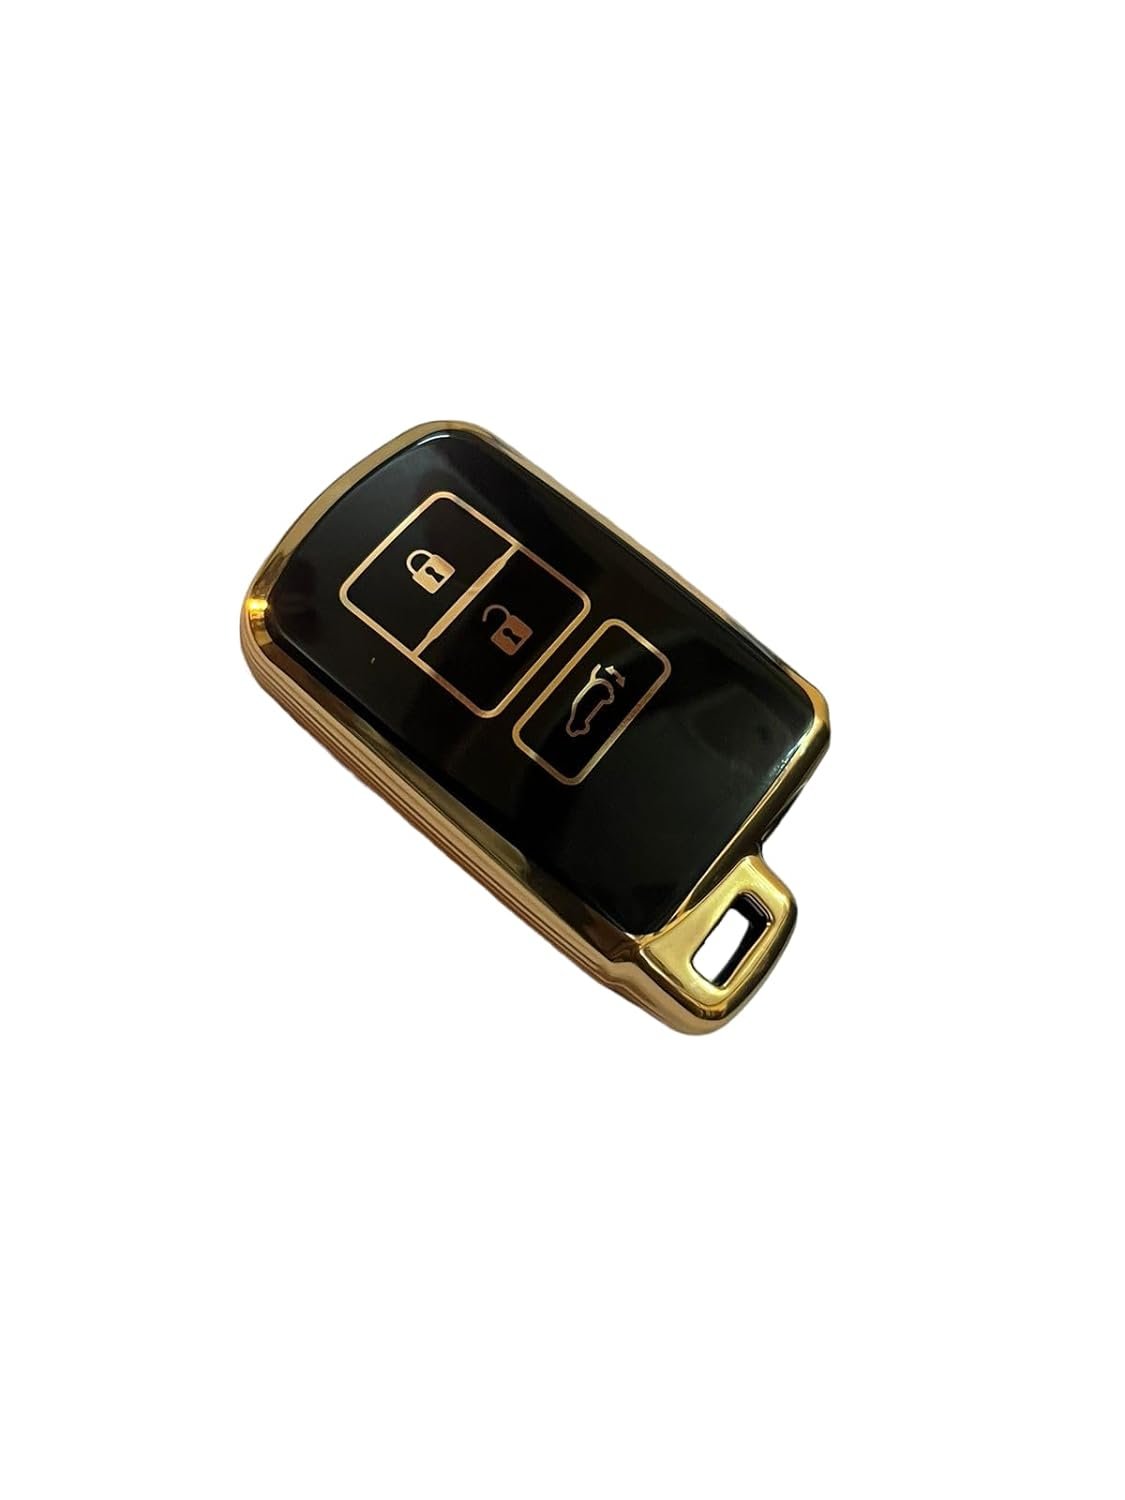 TPU Car Key Cover Compatible with Corolla Altis Smart Key (Gold/Black) Image 